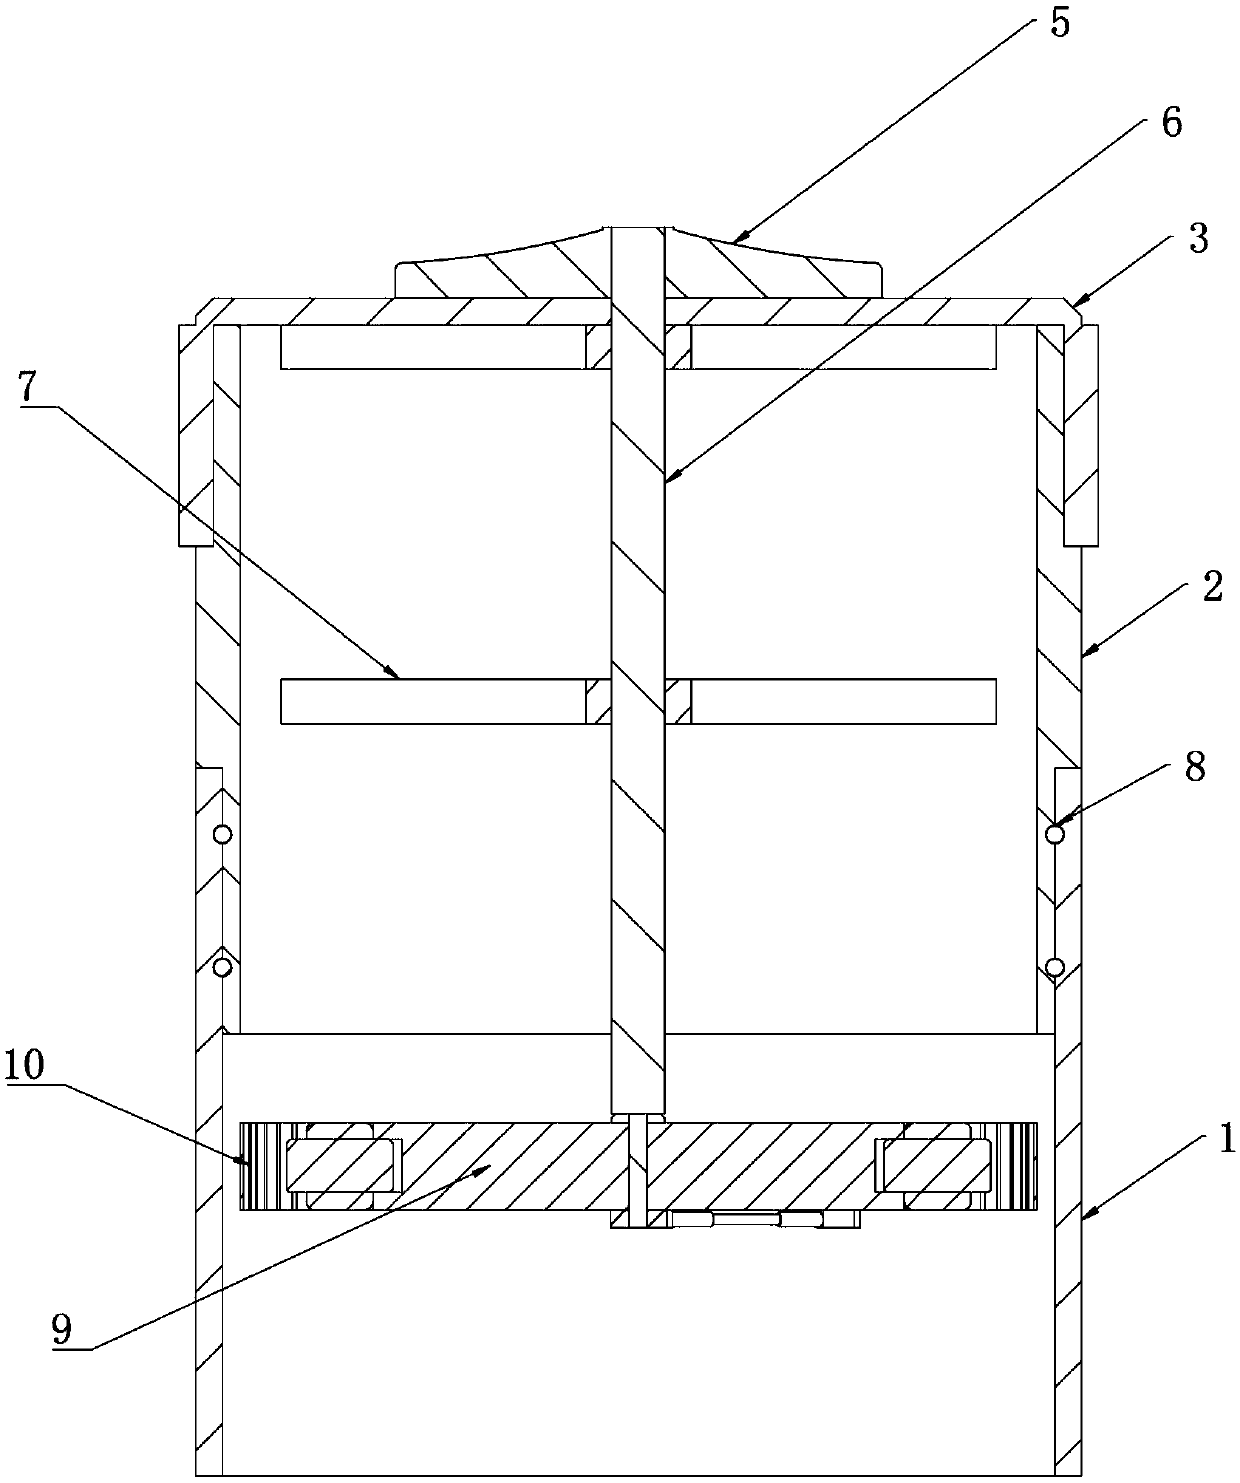 Damping rod friction coefficient regulation and control structure